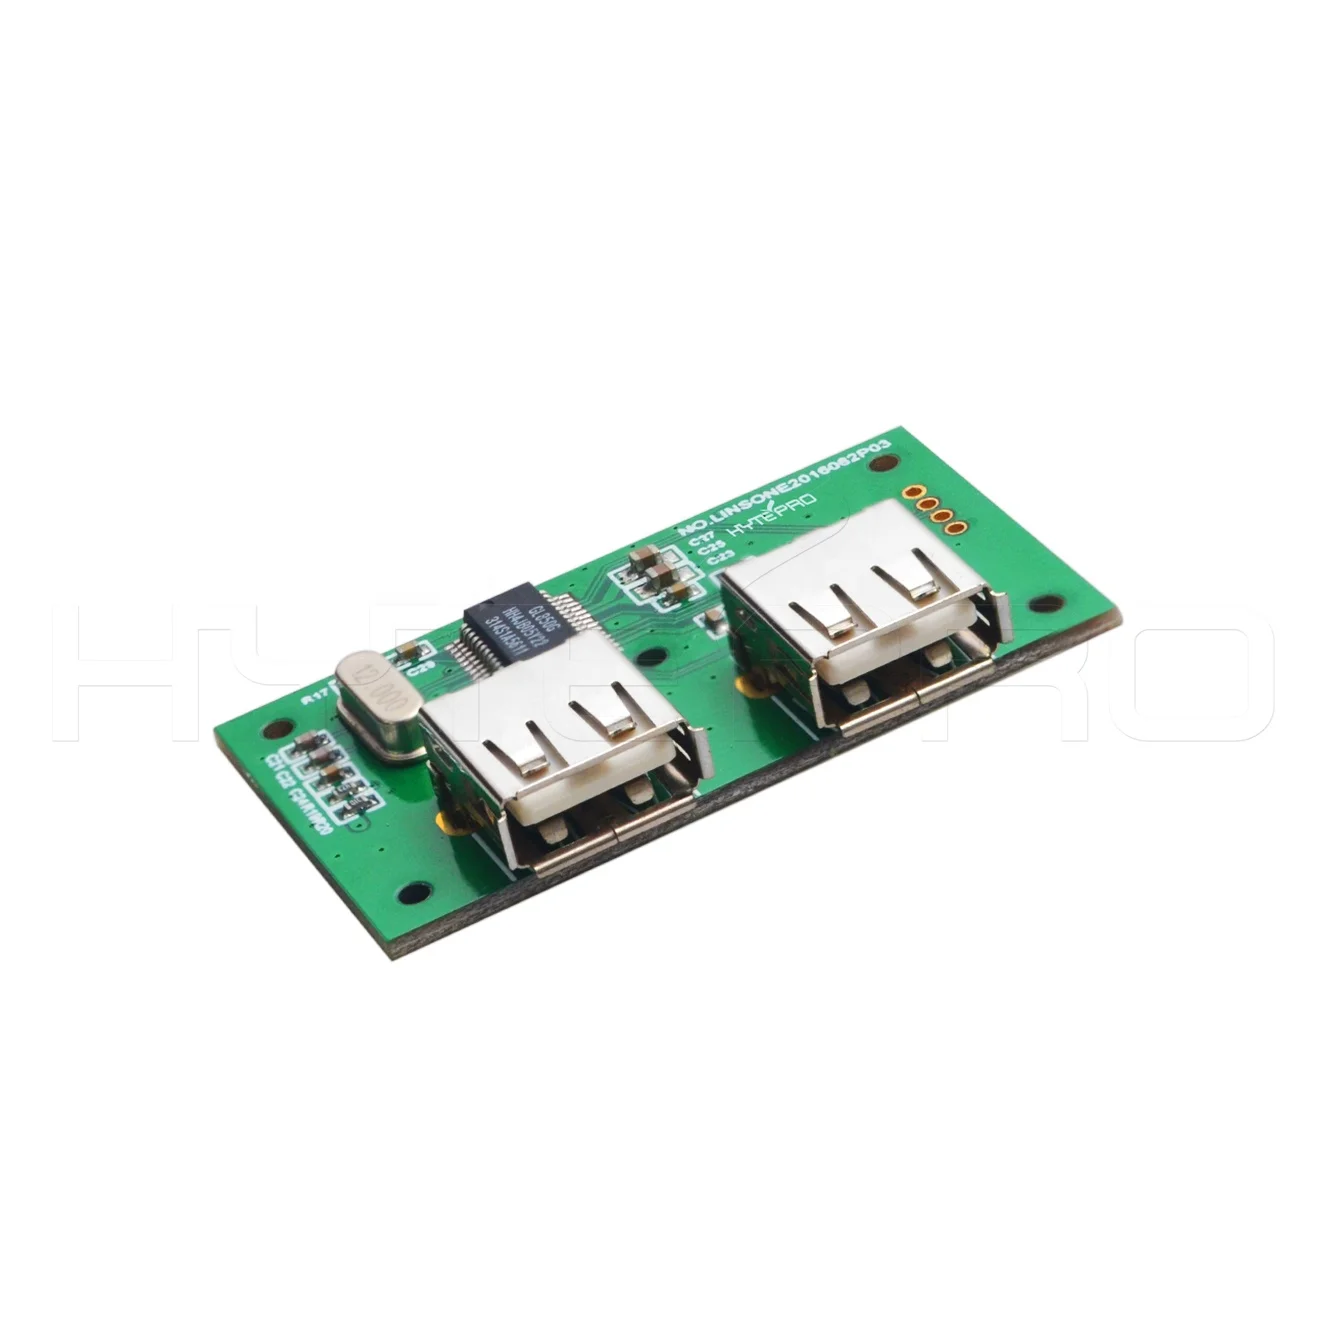 strejke Necessities Traditionel Wholesale HytePro 2 3 4 multiple port 94v-0 usb 2.0 3.0 hub printed pcb  circuit soldering board assembly From m.alibaba.com